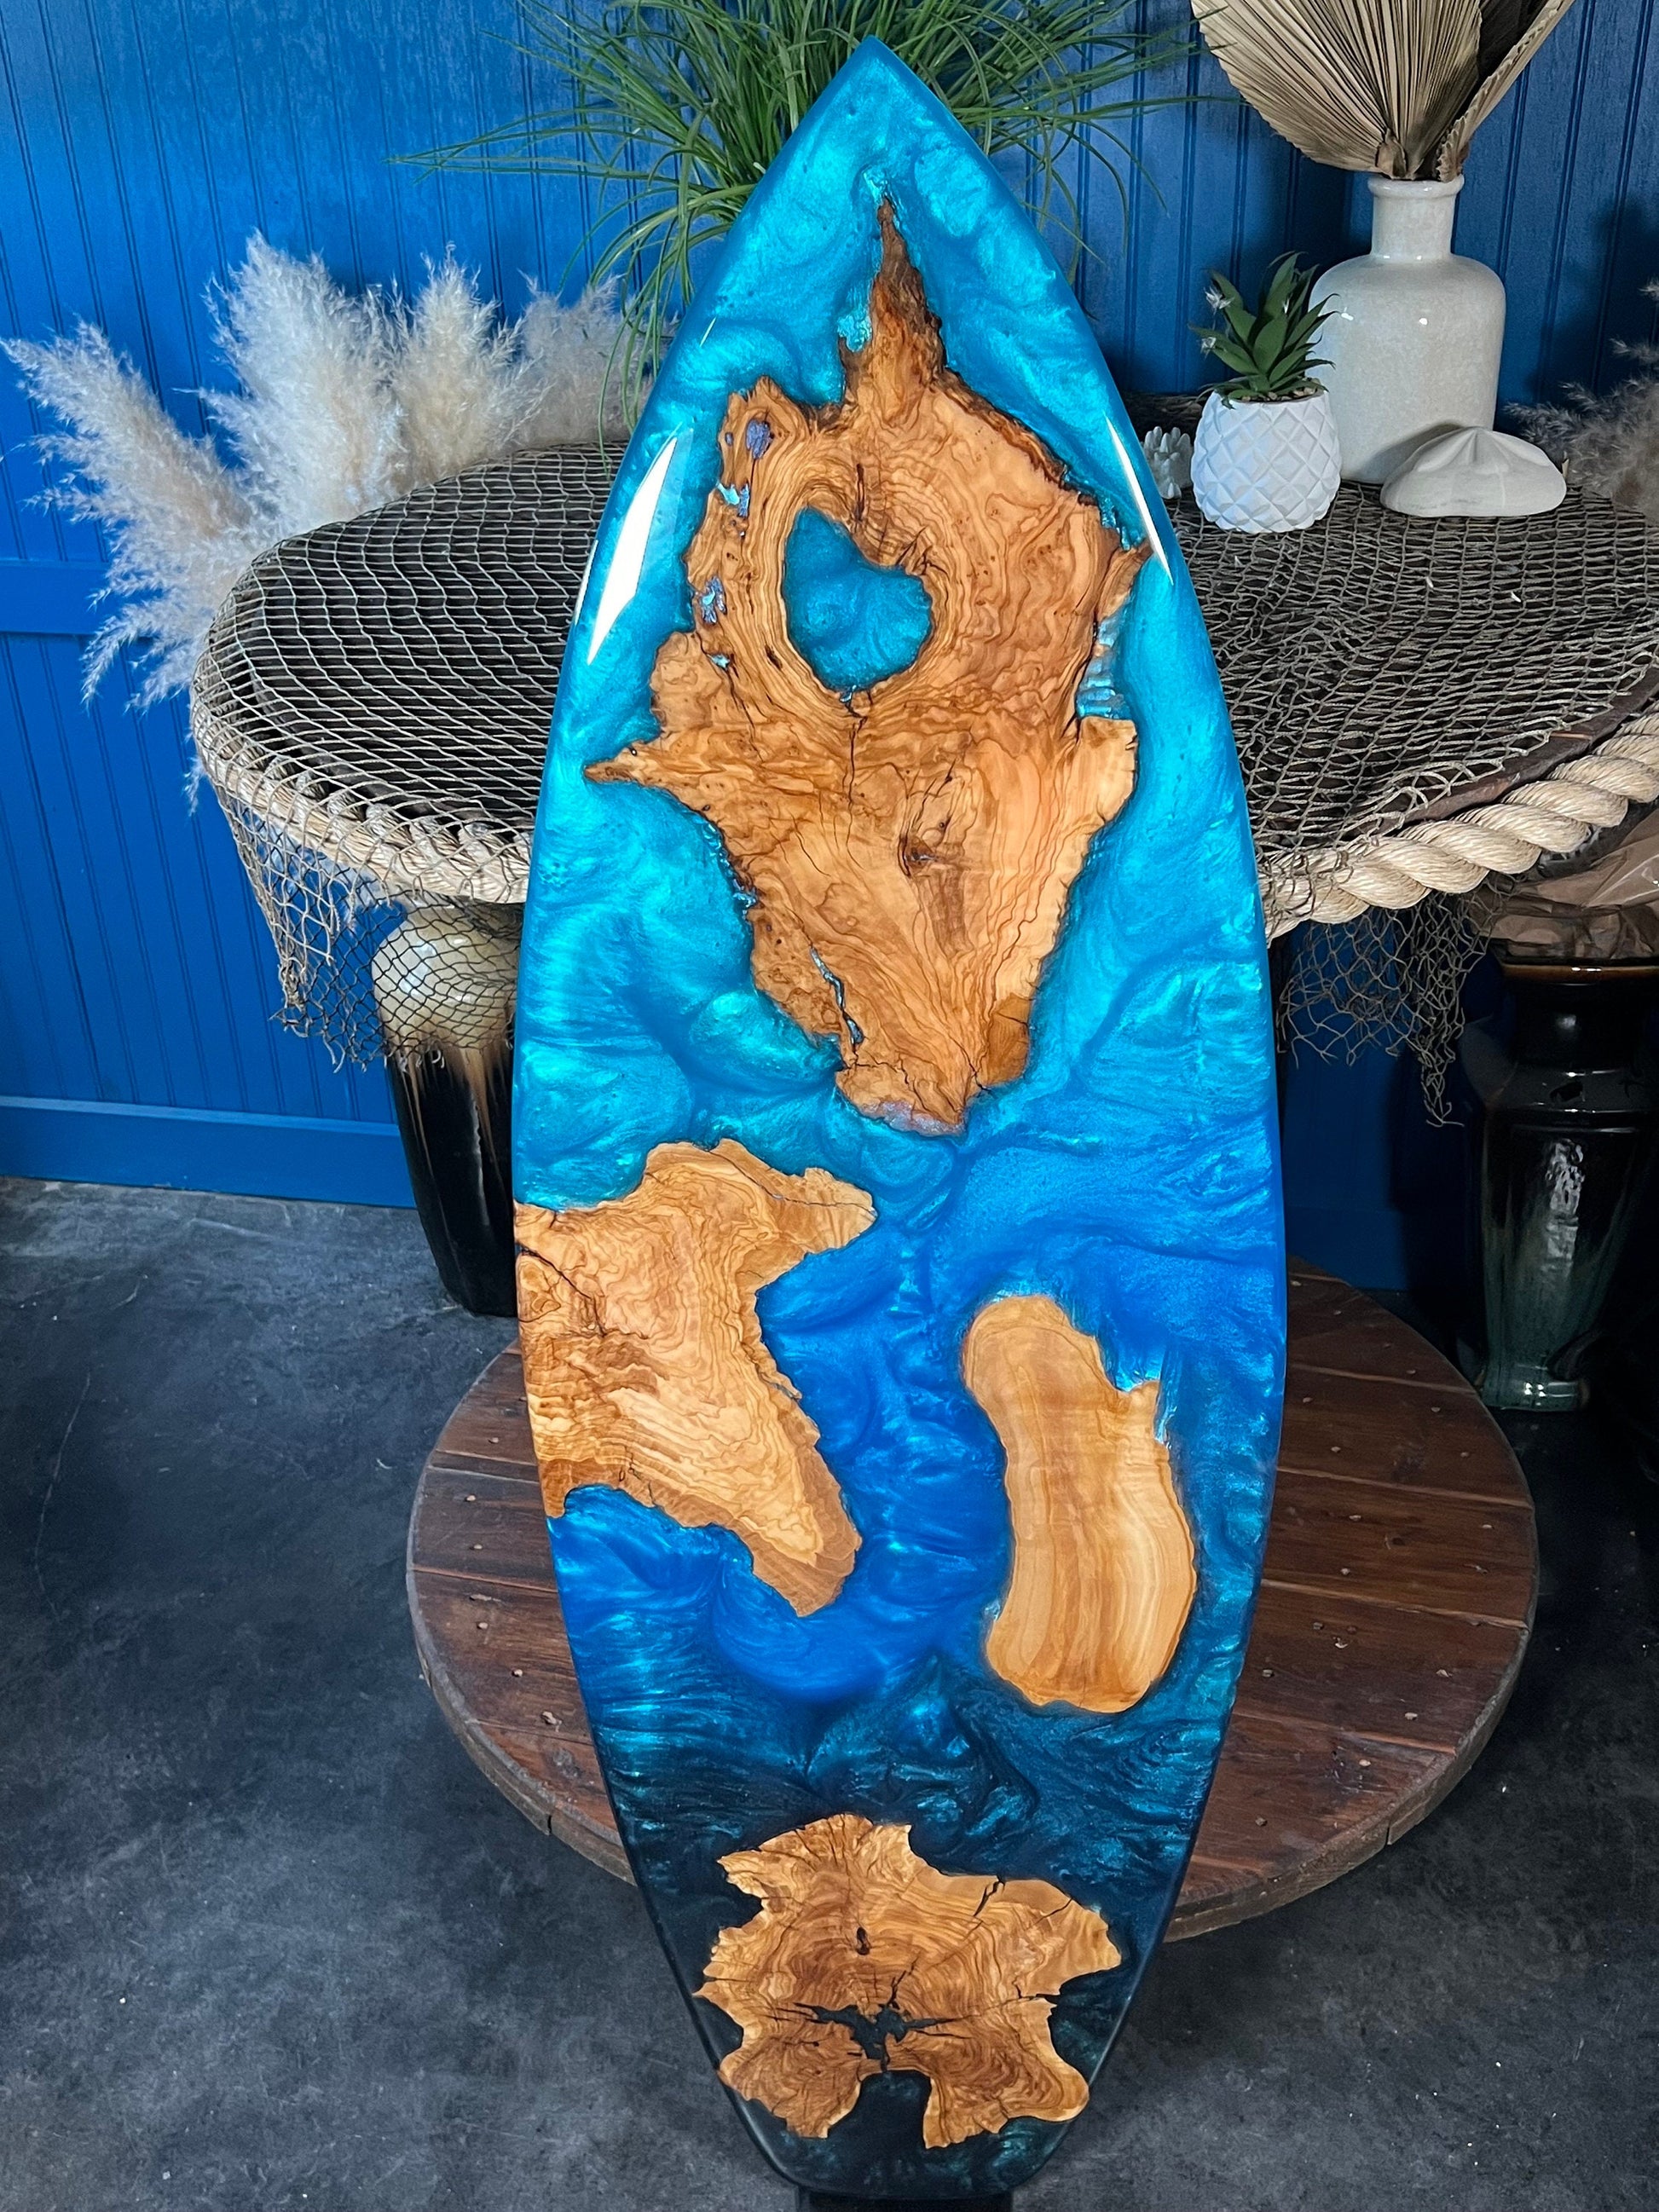 Turquoise and Blue Surfboard